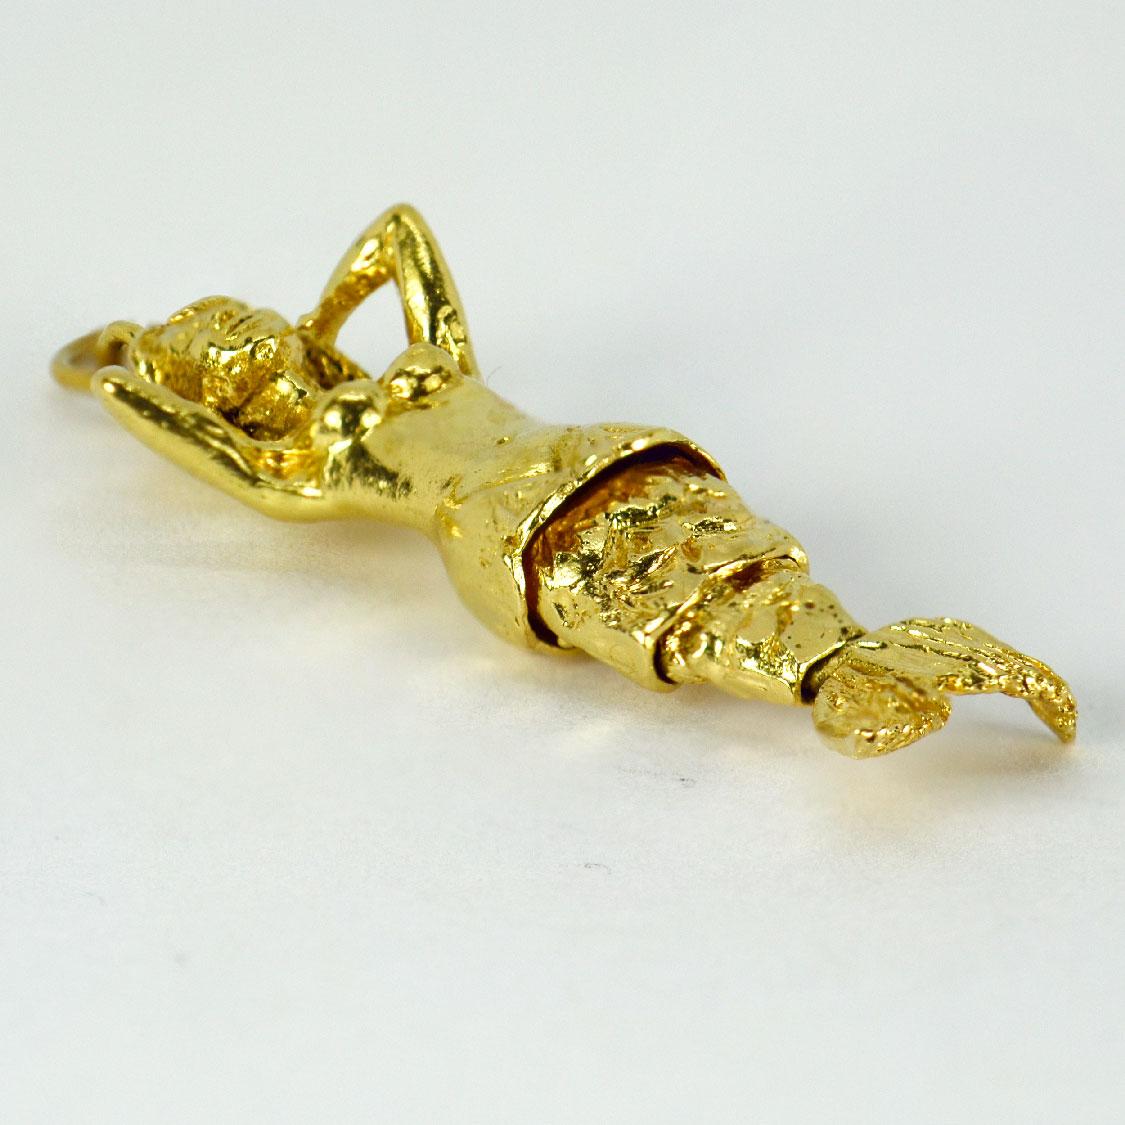 An 18 karat (18K) yellow gold charm pendant designed as a mermaid with an articulated flexible tail. Stamped 18ct  to the bail for 18 karat gold.

Dimensions: 4.8 x 1.7 x 0.8 cm (not including jump ring)
Weight: 12.00 grams 

